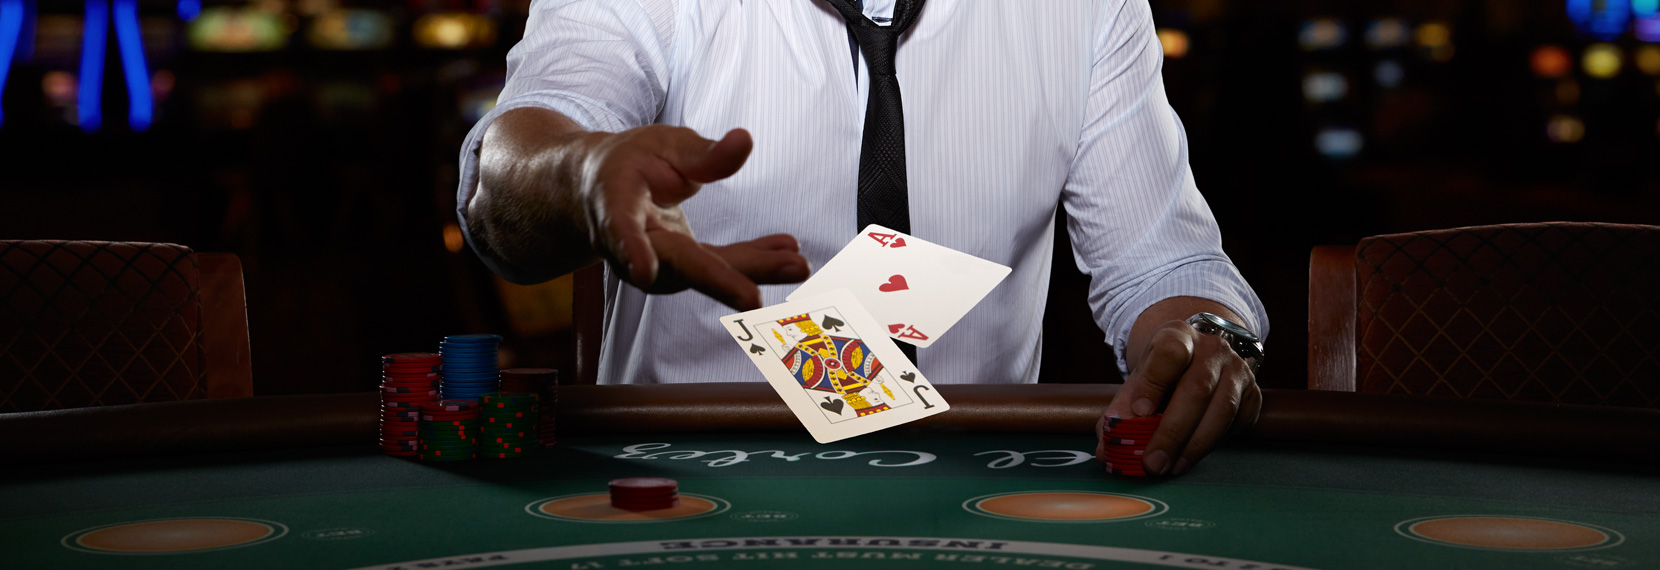 blackjack table, player and cards